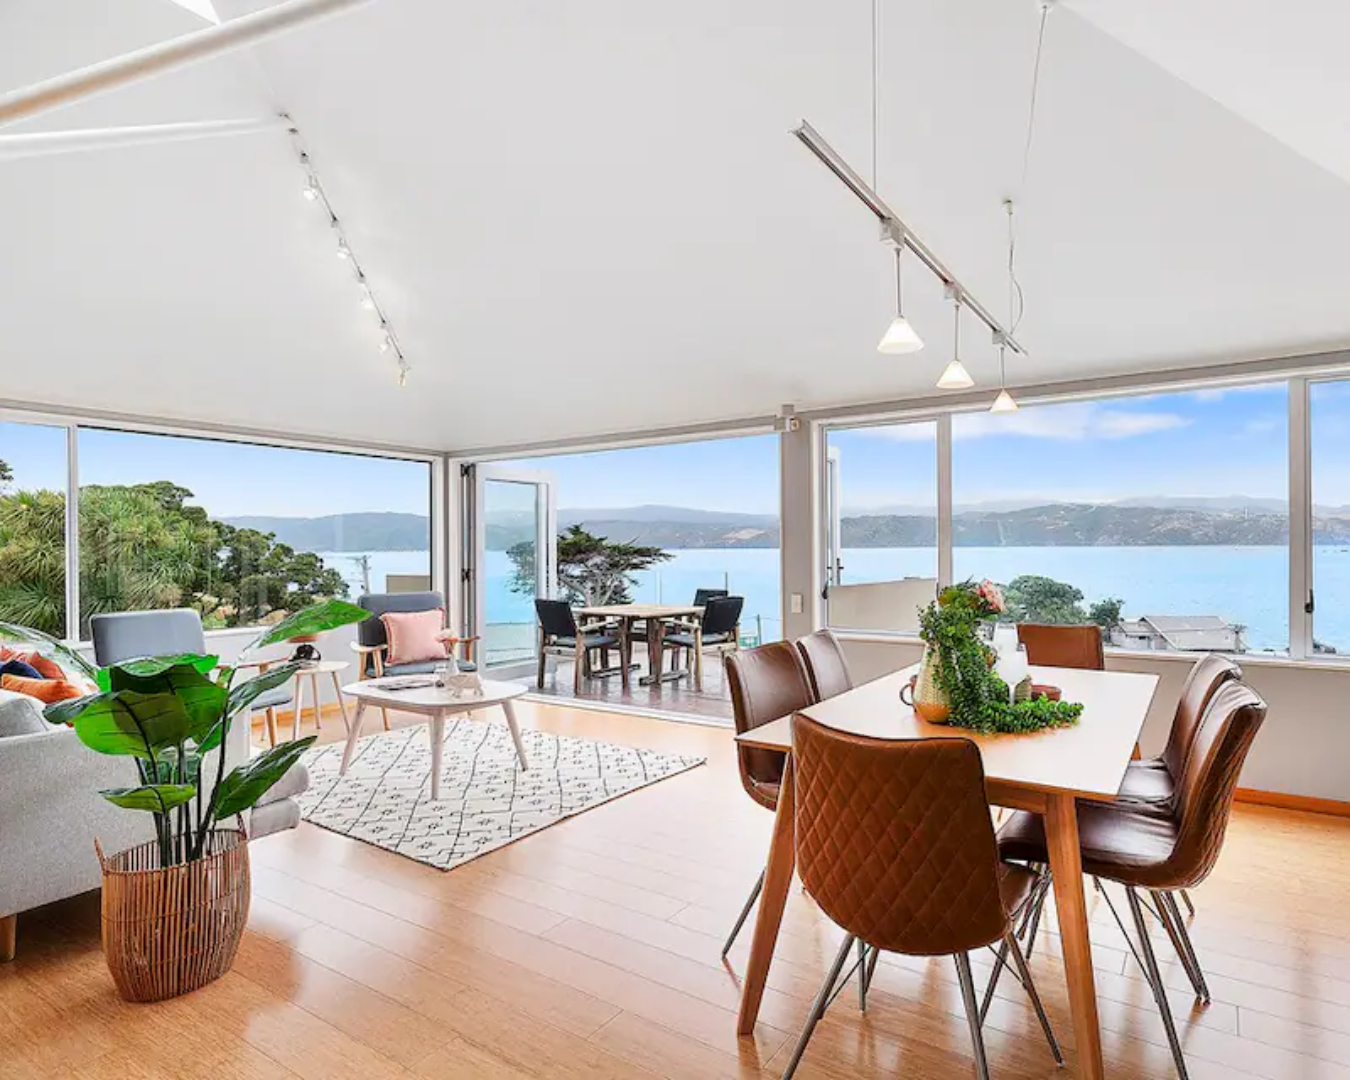 A shot of the gorgeous, open living and dining area at the Beachstay in Seatoun, including its sweeping ocean views, and this is definitely one of the best airbnbs in Wellington.